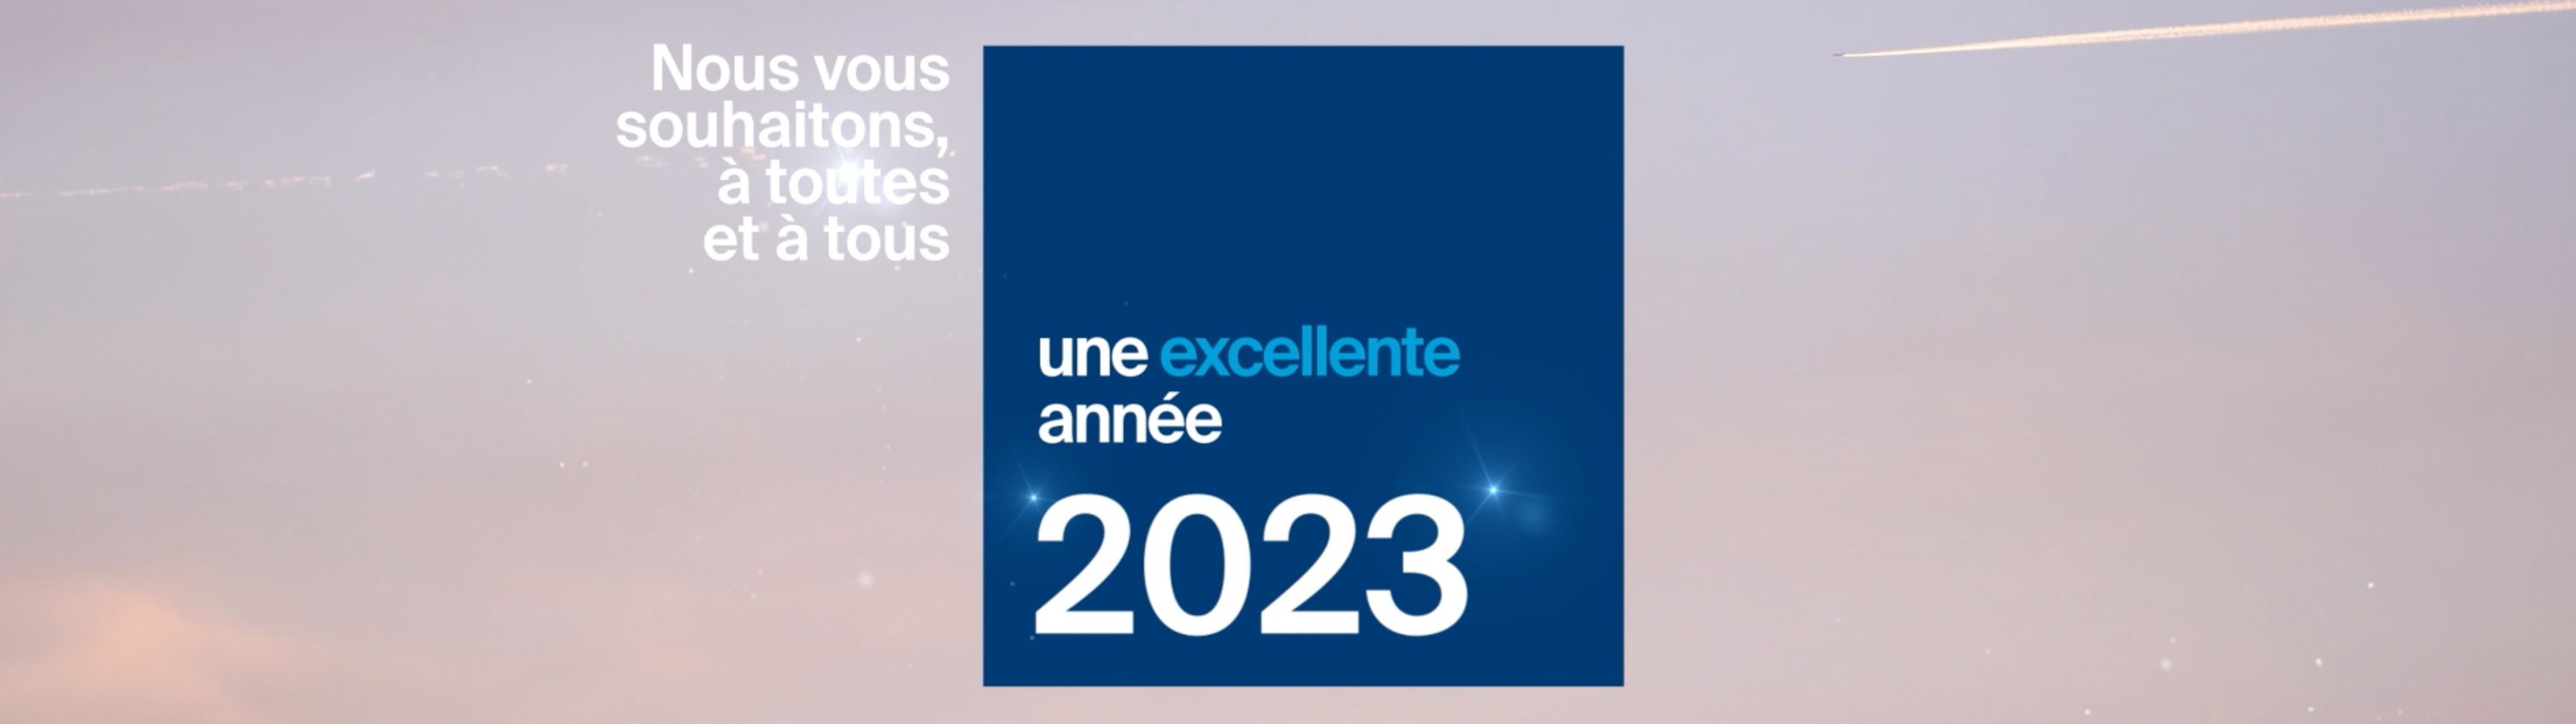 Kuehne+Nagel France wishes a happy new year 2023!